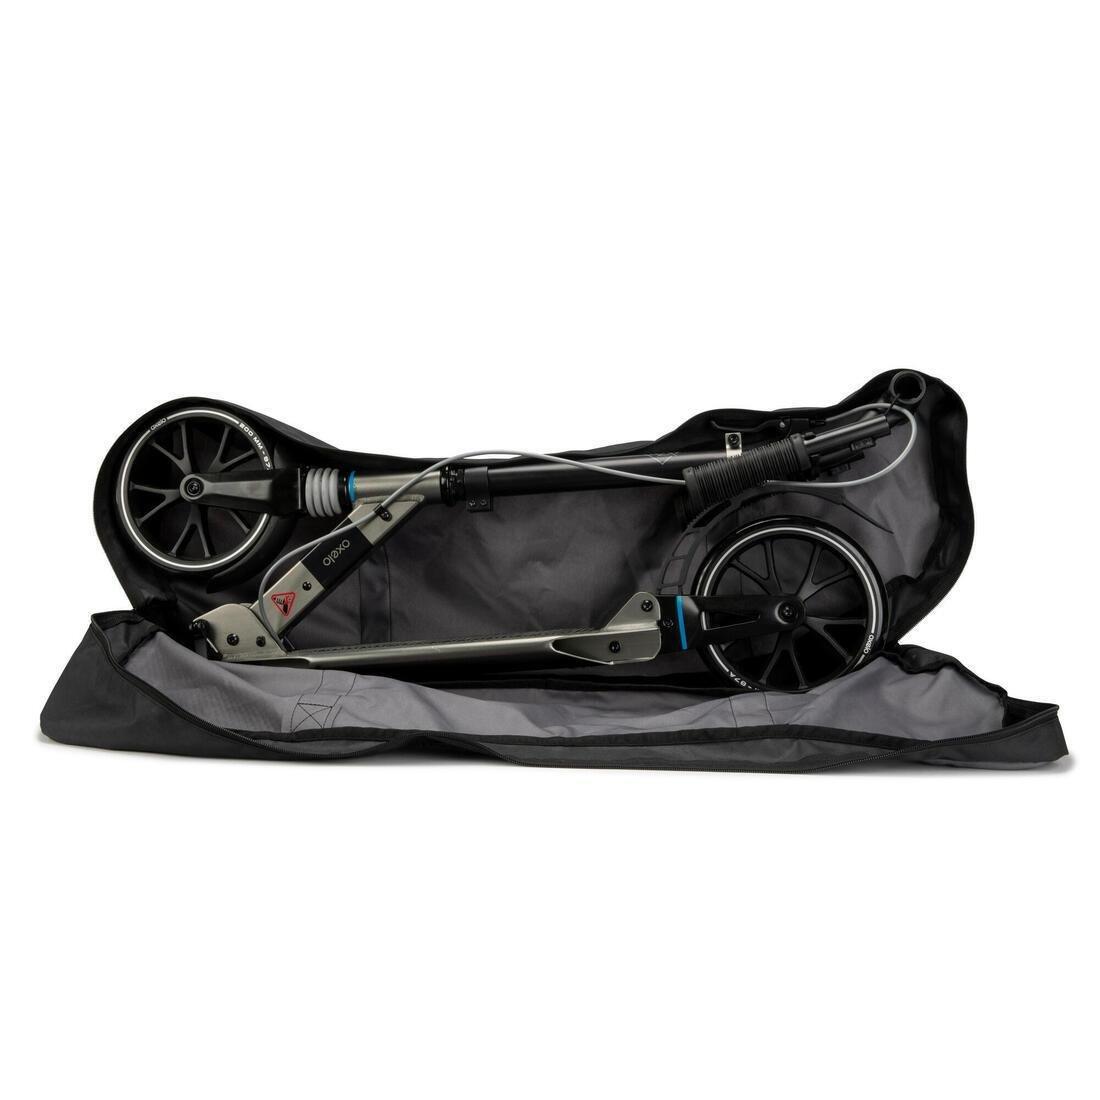 OXELO - Transport Bag For Adult Scooter, Pebble Grey